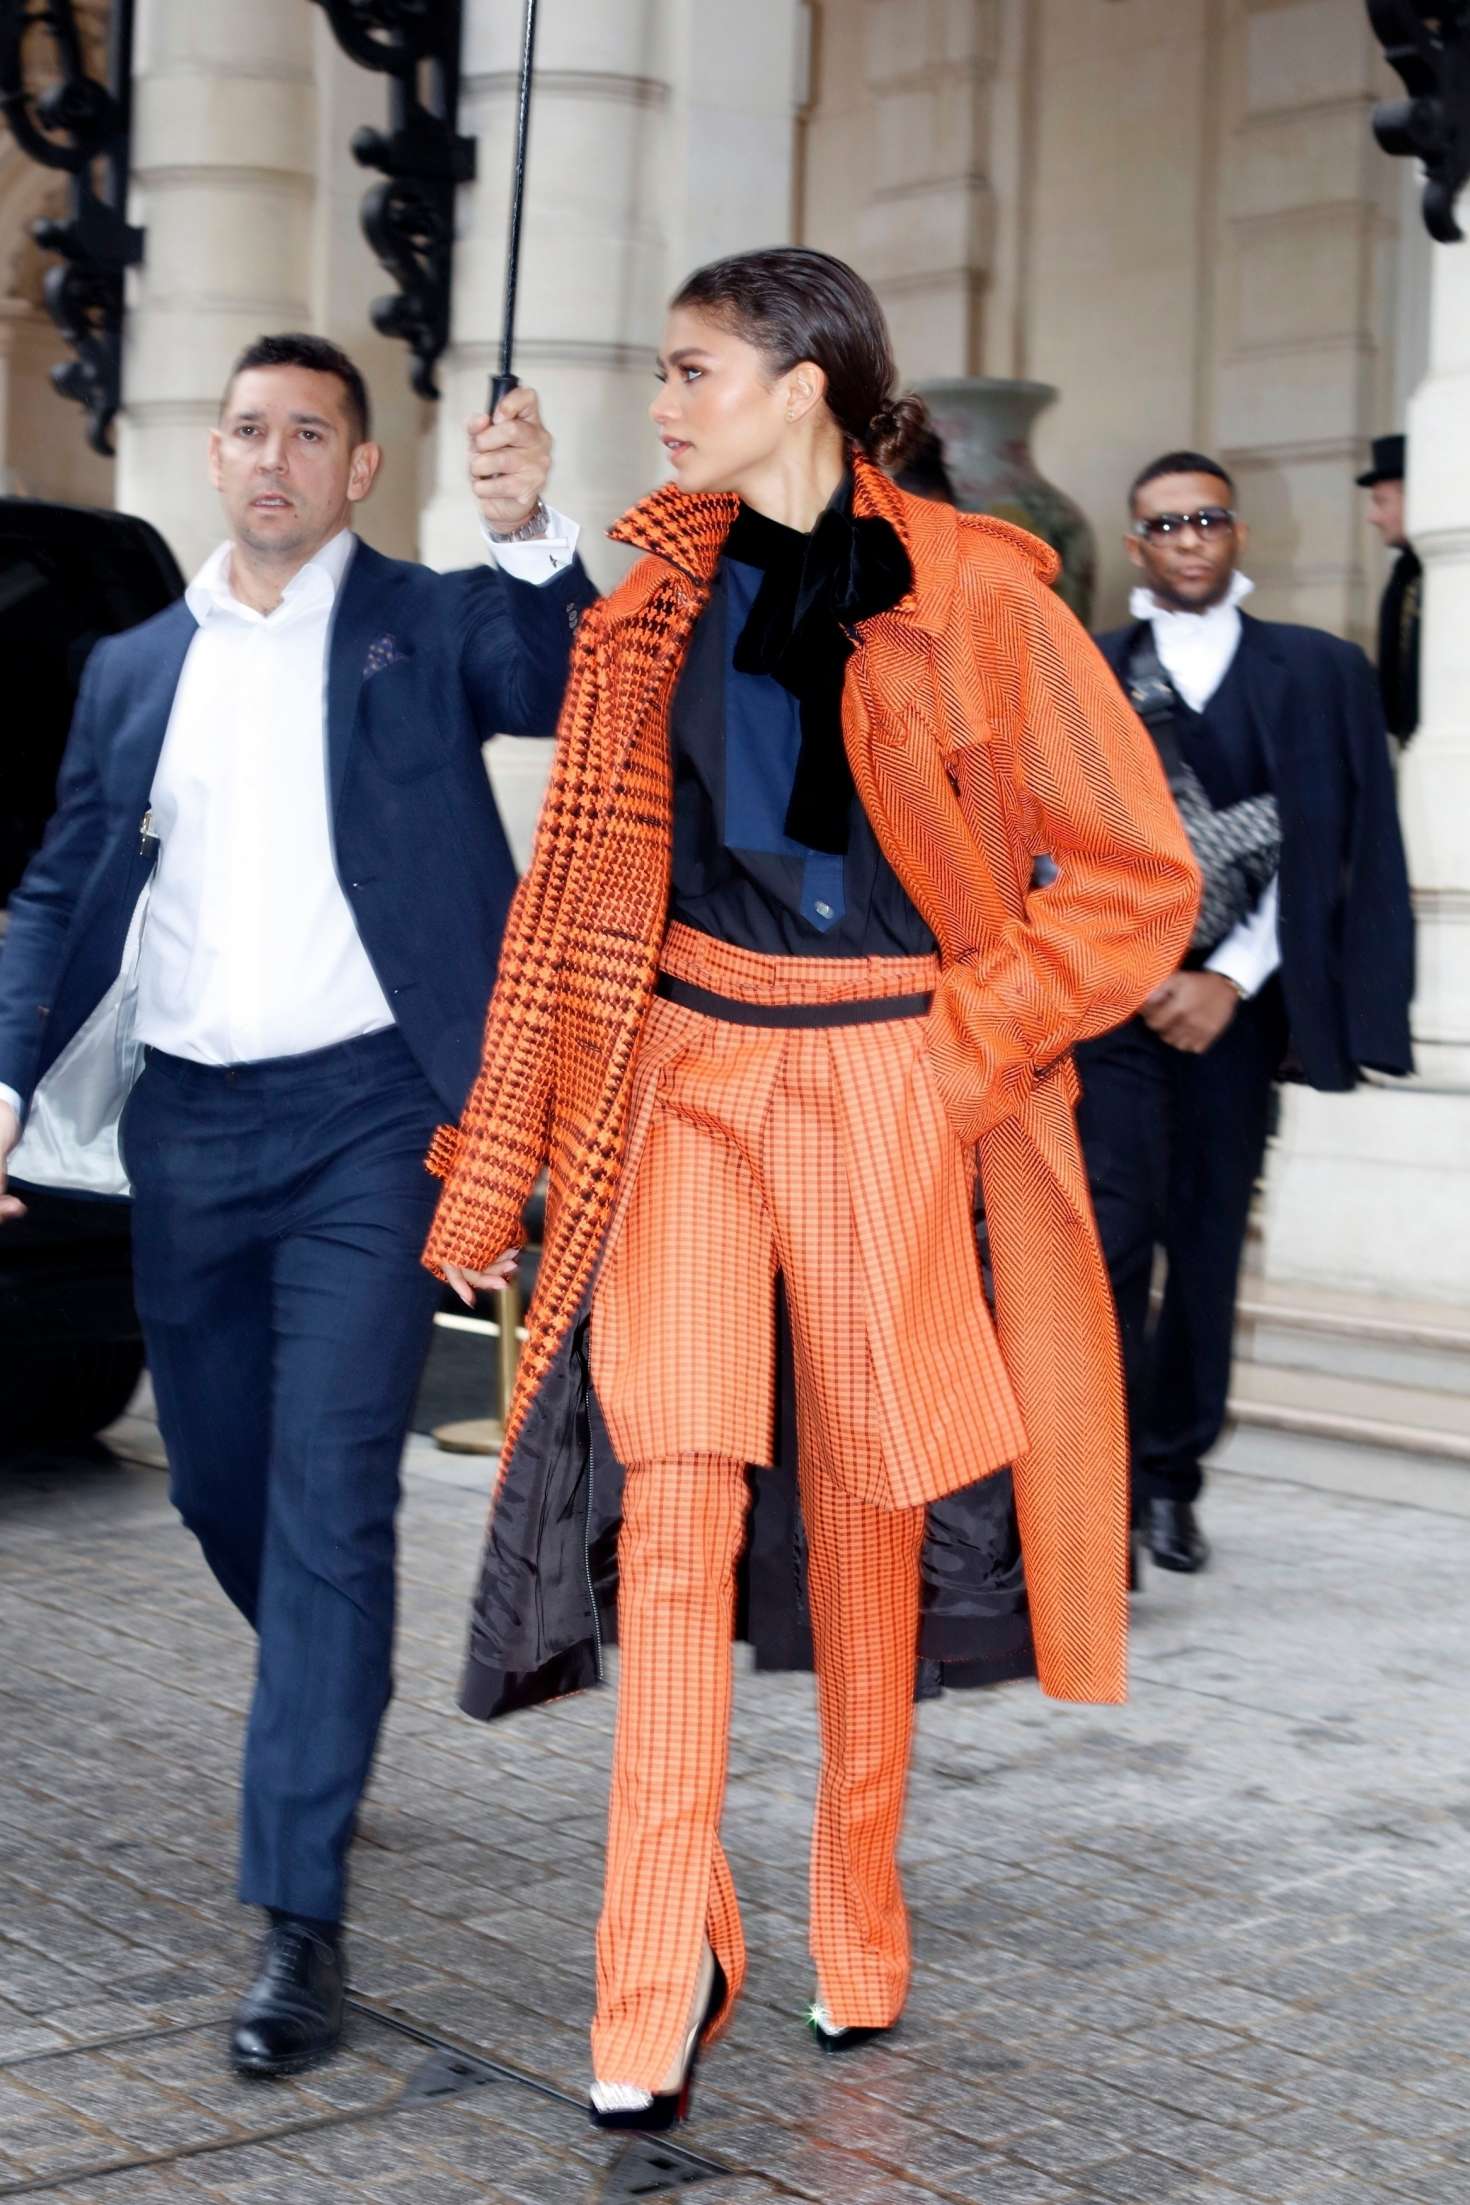 Zendaya: Out and about in Paris -02 | GotCeleb